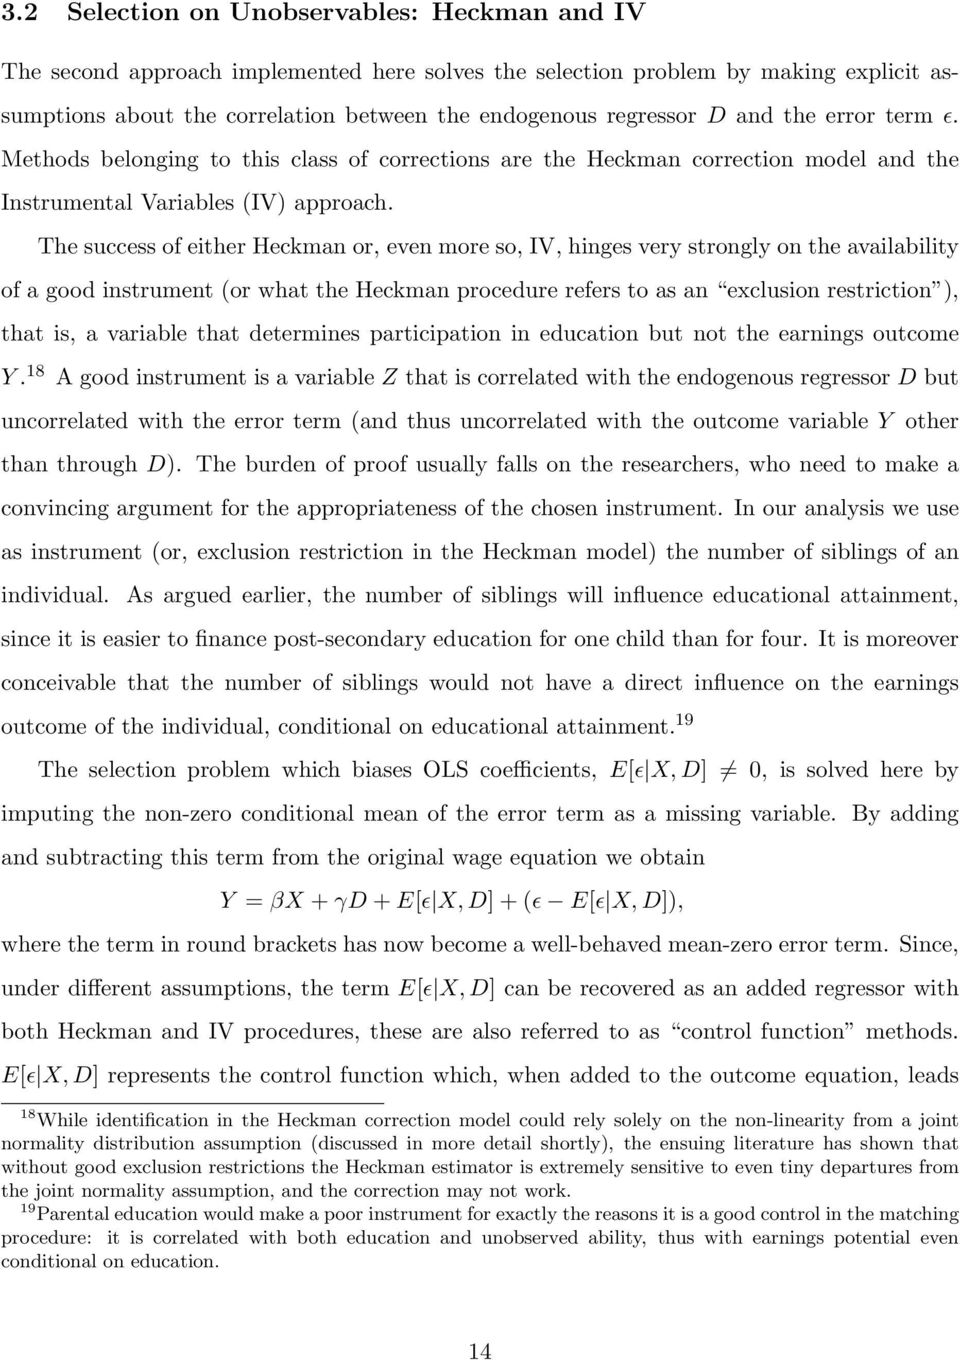 The success of either Heckman or, even more so, IV, hinges very strongly on the availability of a good instrument (or what the Heckman procedure refers to as an exclusion restriction ), that is, a